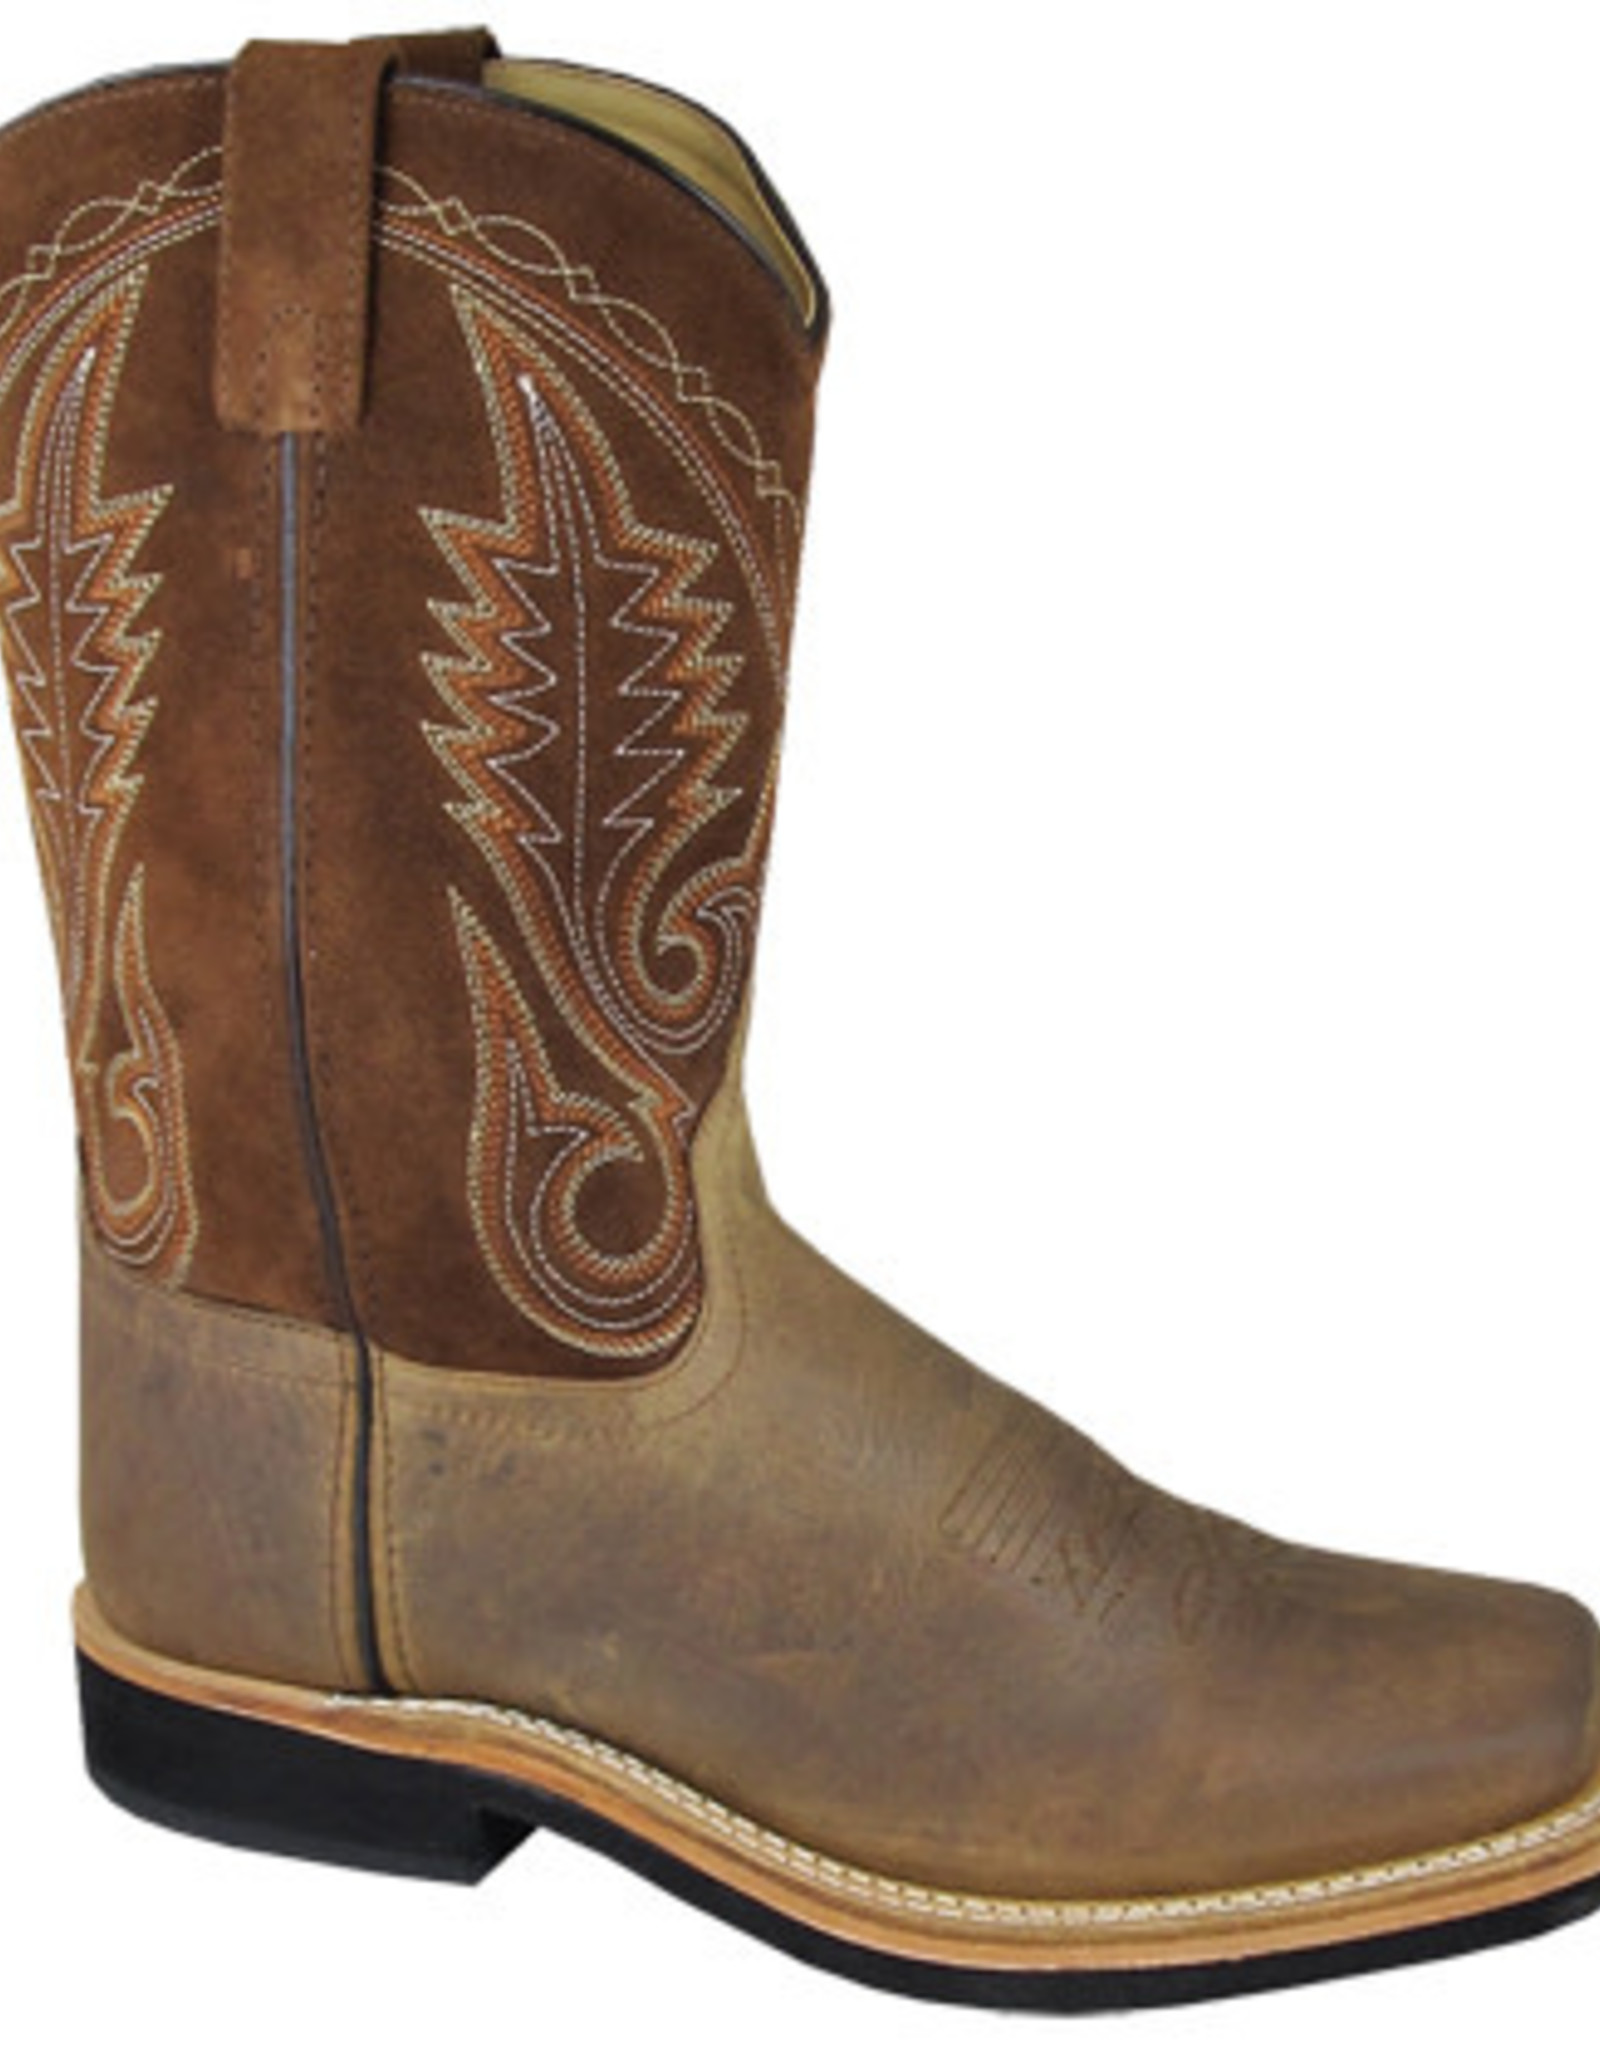 Smoky Mountain Boonville Brown Distress Leather Western Boot Men's